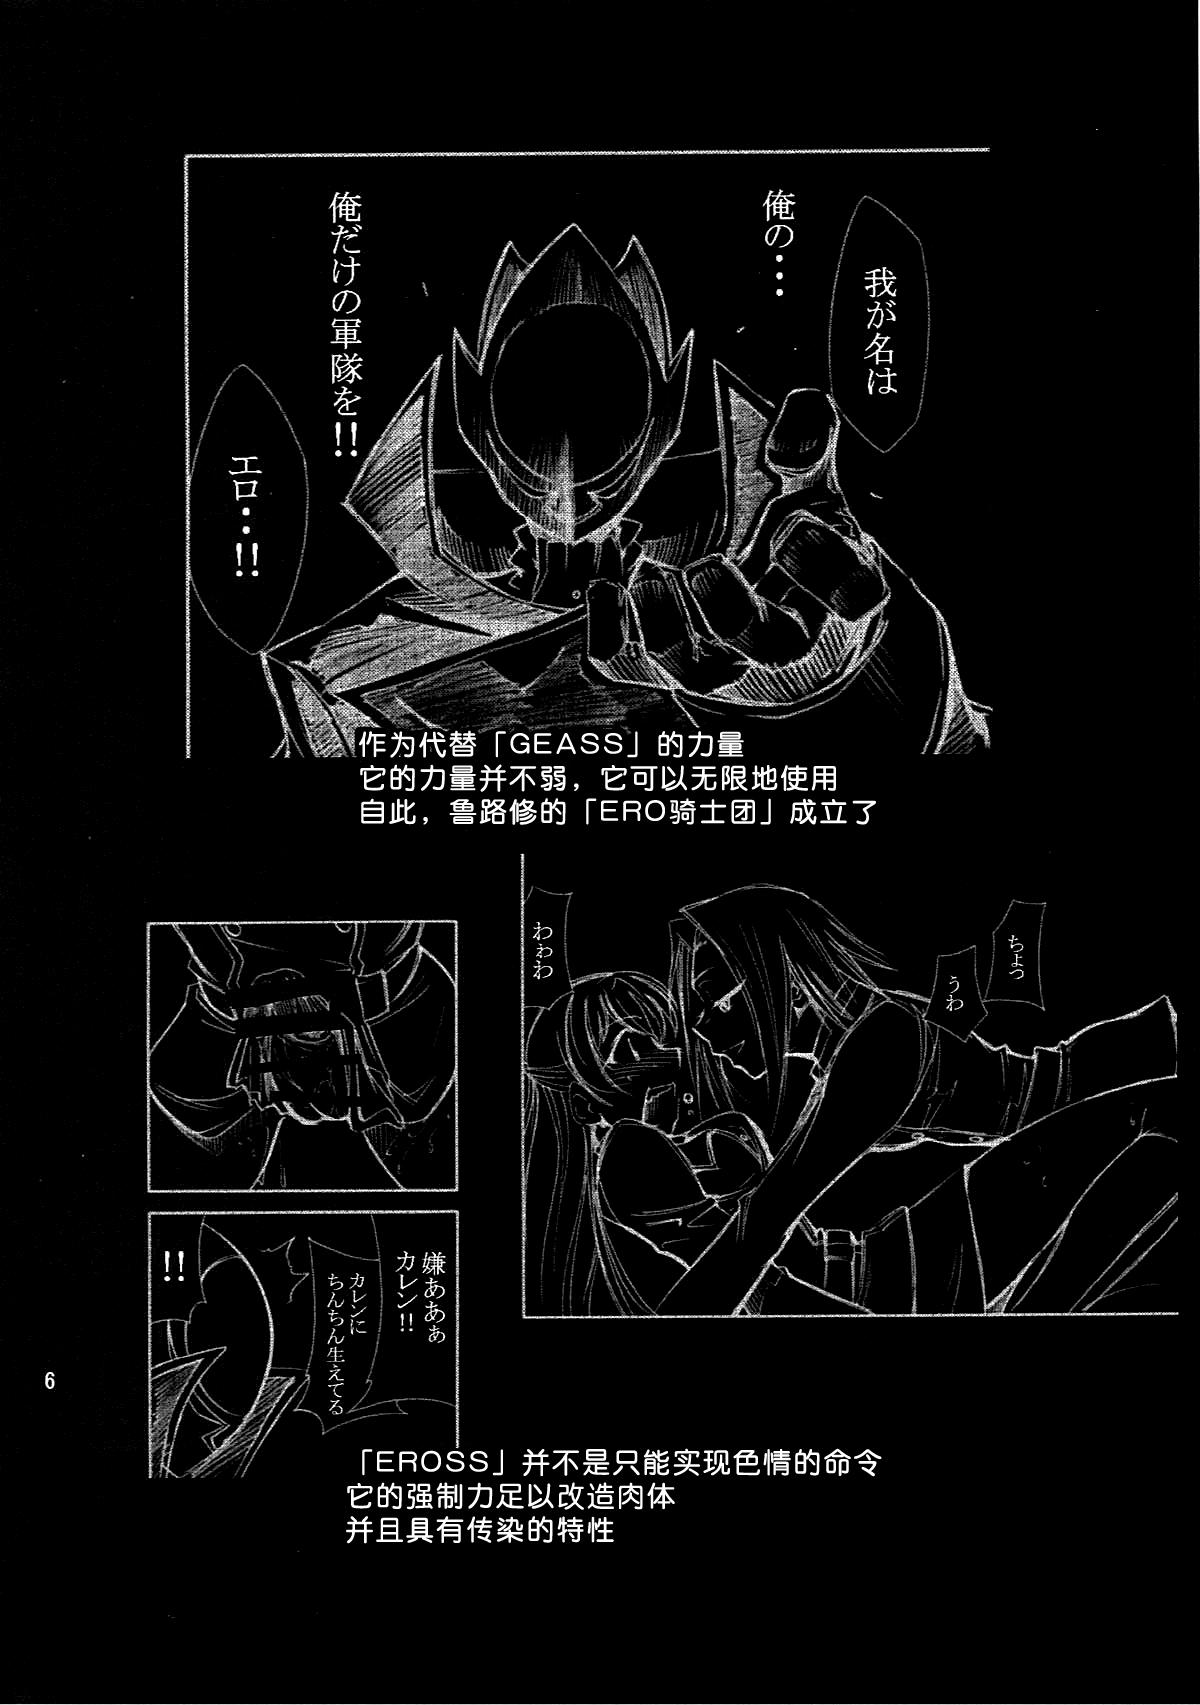 Foot CODE EROSS R2 - Code geass 18 Year Old - Page 5